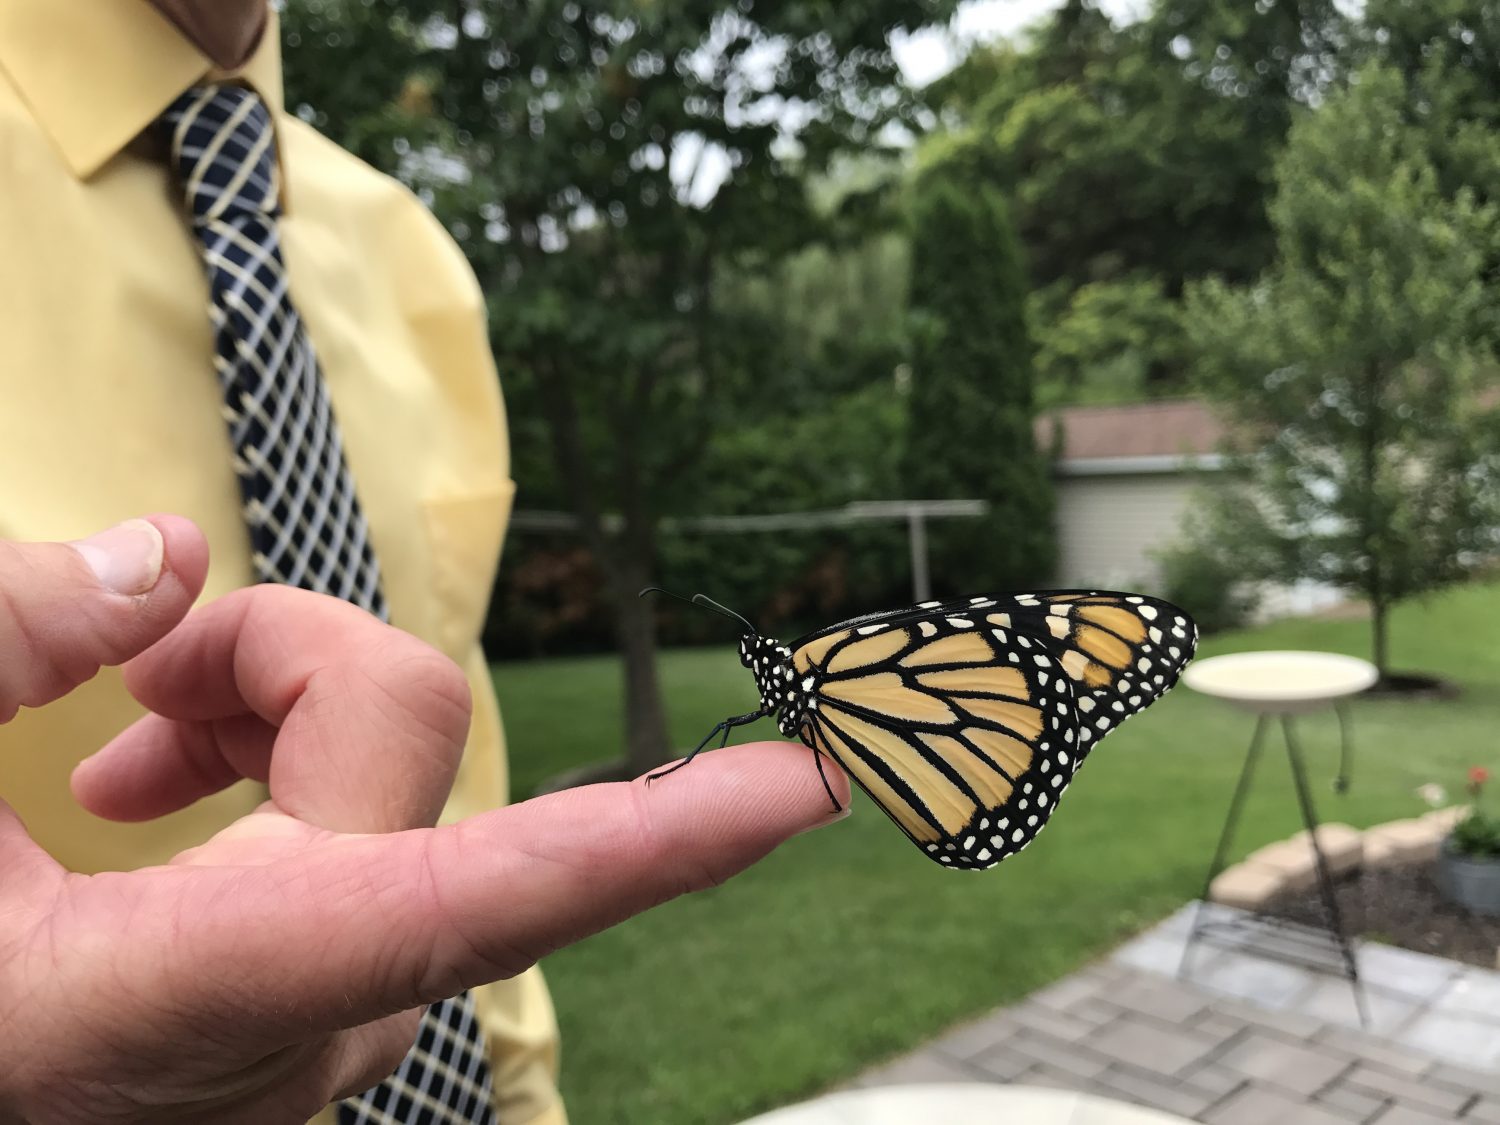 Sam Warp holds a newly hatched monarch butterfly, raised in a small aquarium as part of the monarch conservation project in Marshfield.